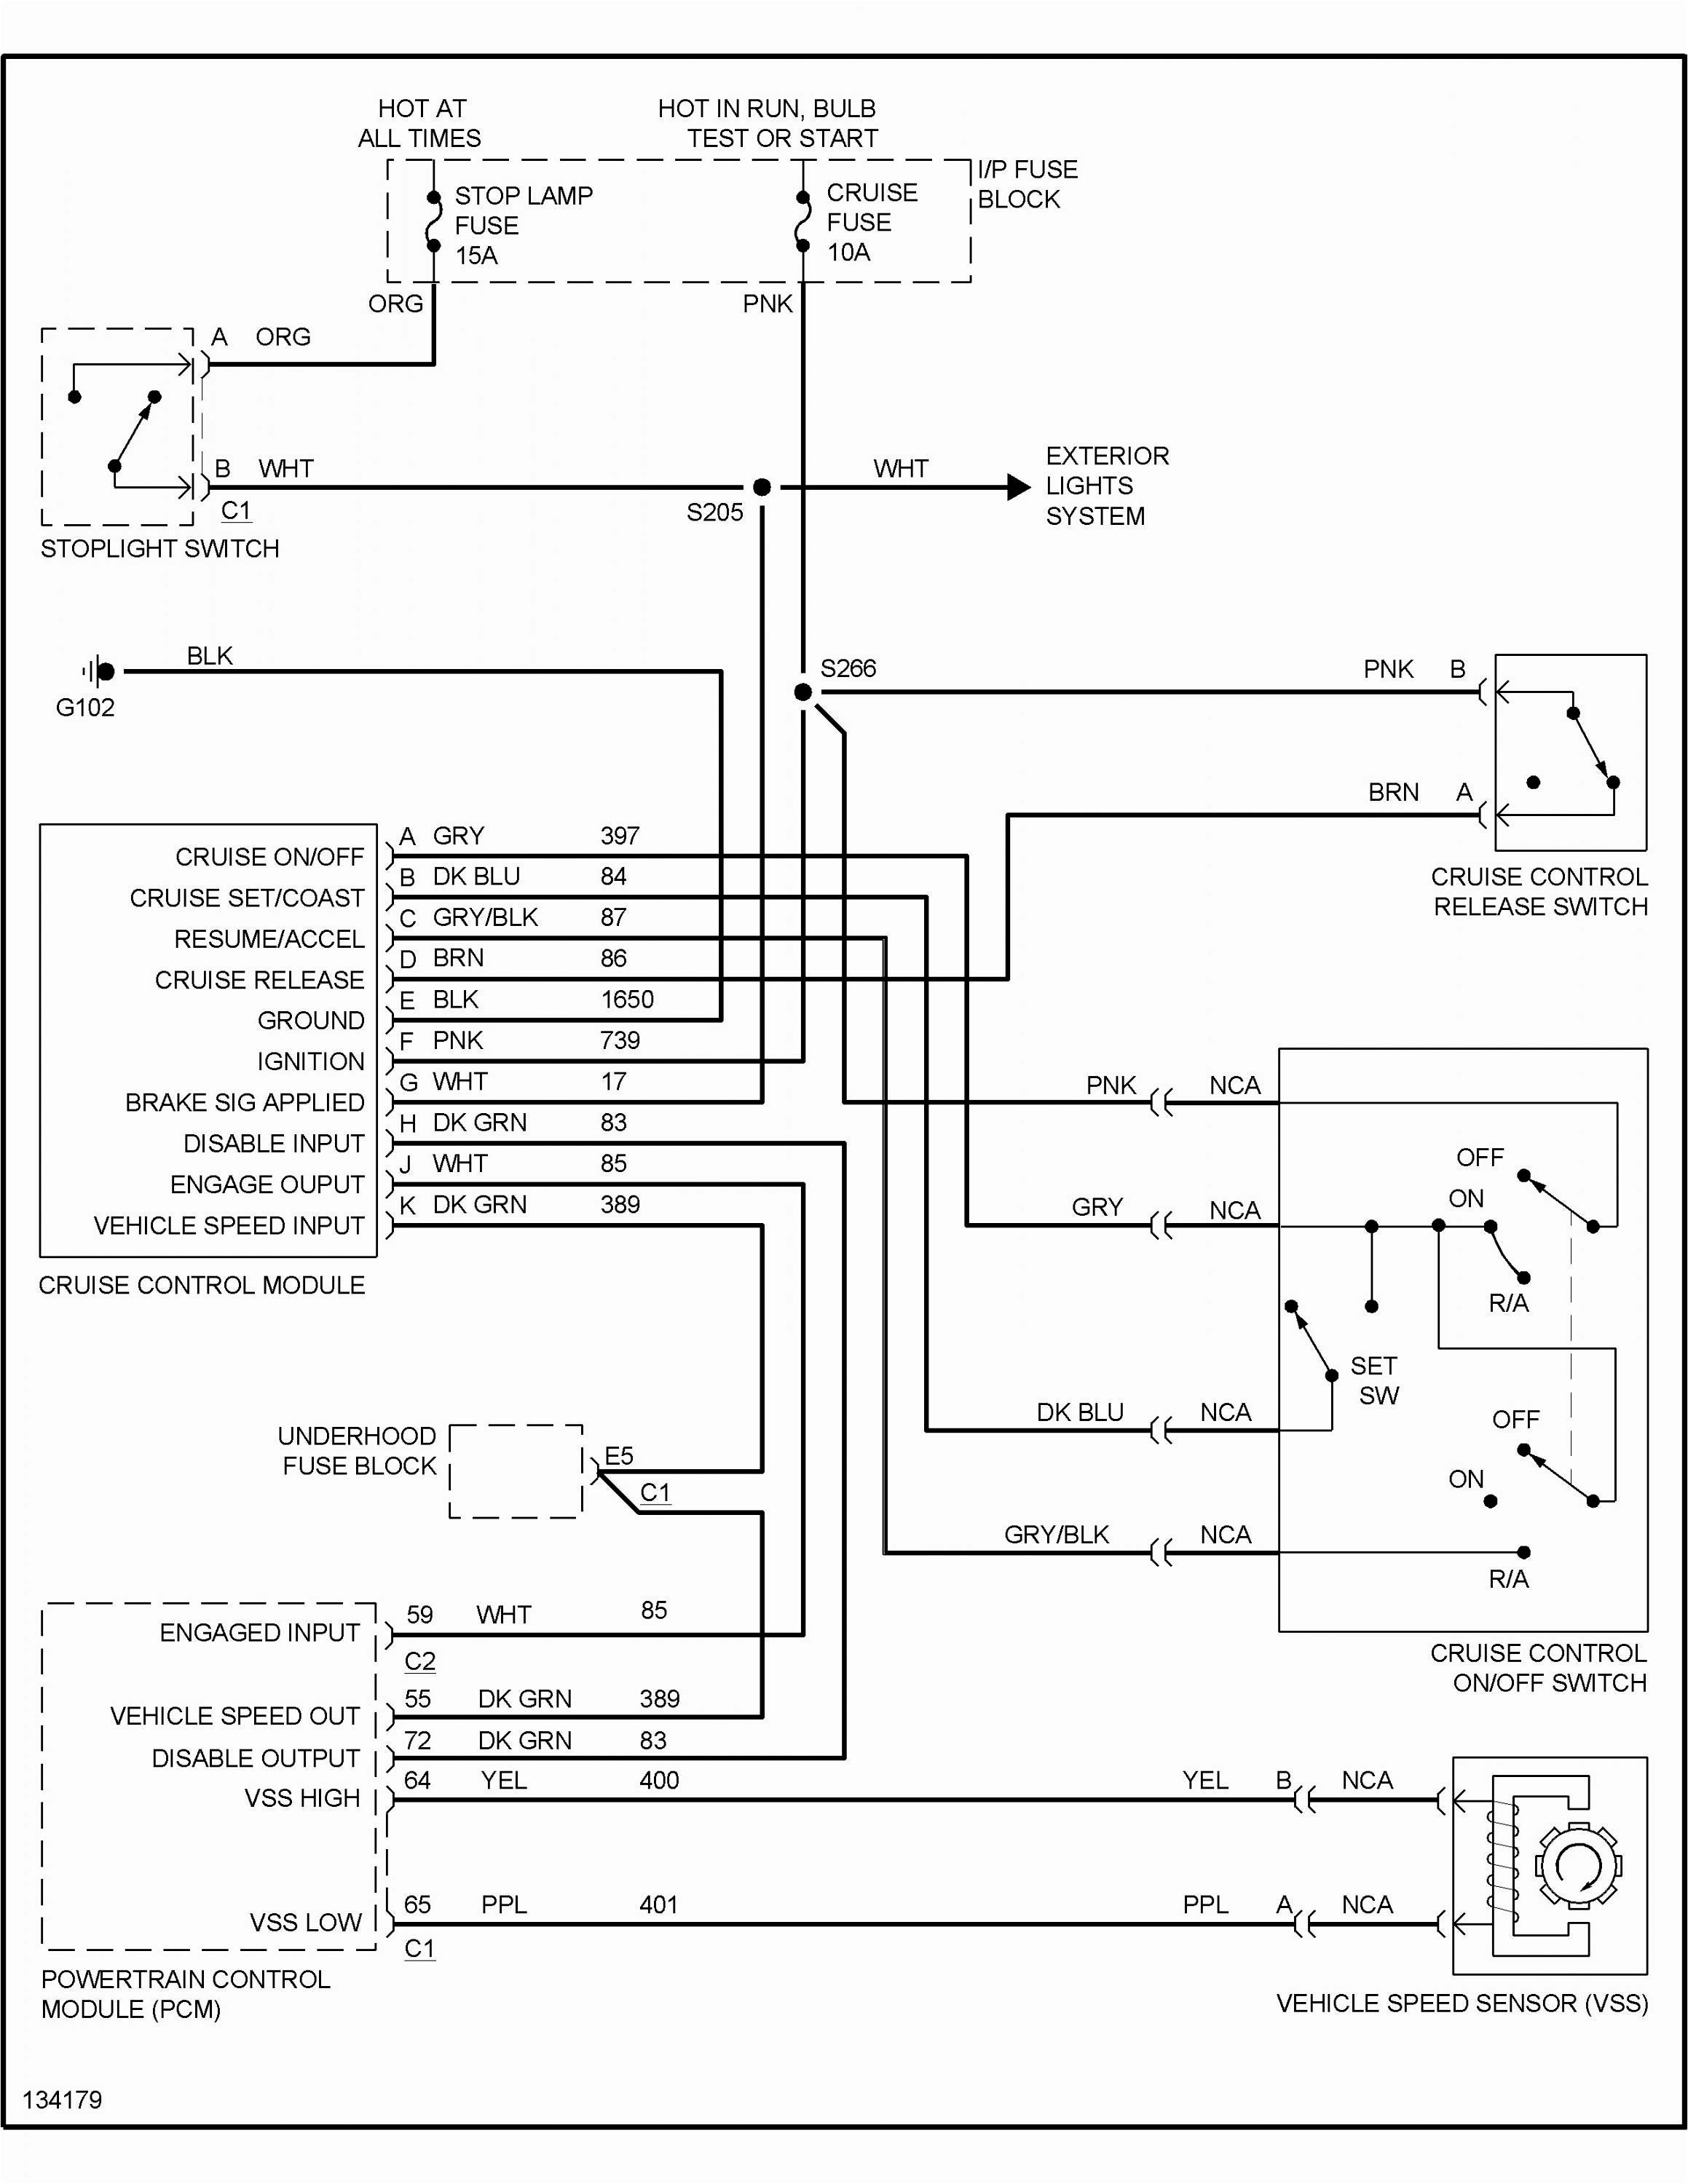 Sony Fm Am Compact Disc Player Wiring Diagram sony Cdx F5710 Radio Wiring Diagram with Chunyan Of Sony Fm Am Compact Disc Player Wiring Diagram